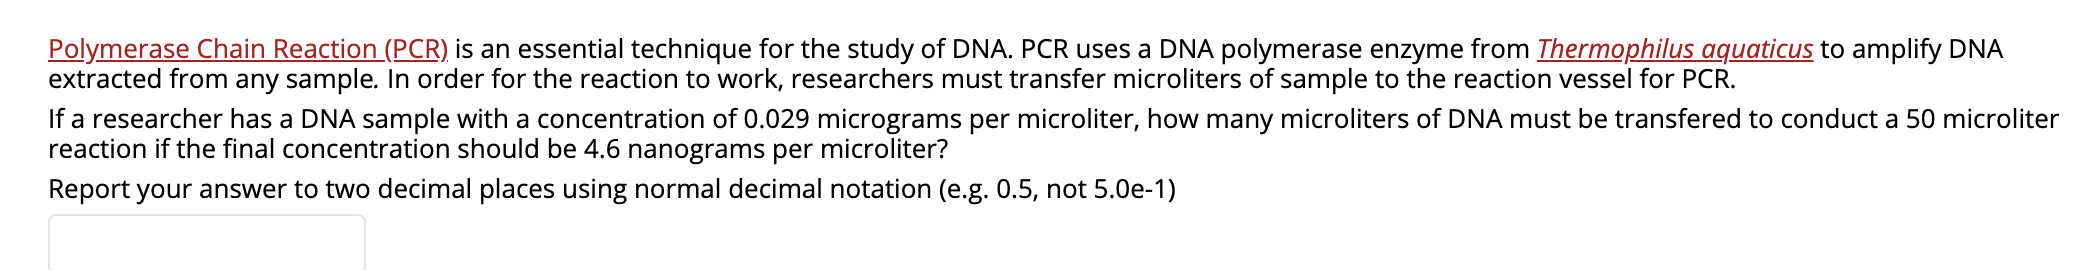 Polymerase Chain Reaction (PCR) is an essential technique for the study of DNA. PCR uses a DNA polymerase enzyme from Thermophilus aquaticus to amplify DNA
extracted from any sample. In order for the reaction to work, researchers must transfer microliters of sample to the reaction vessel for PCR.
If a researcher has a DNA sample with a concentration of 0.029 micrograms per microliter, how many microliters of DNA must be transfered to conduct a 50 microliter
reaction if the final concentration should be 4.6 nanograms per microliter?
Report your answer to two decimal places using normal decimal notation (e.g. 0.5, not 5.0e-1)
